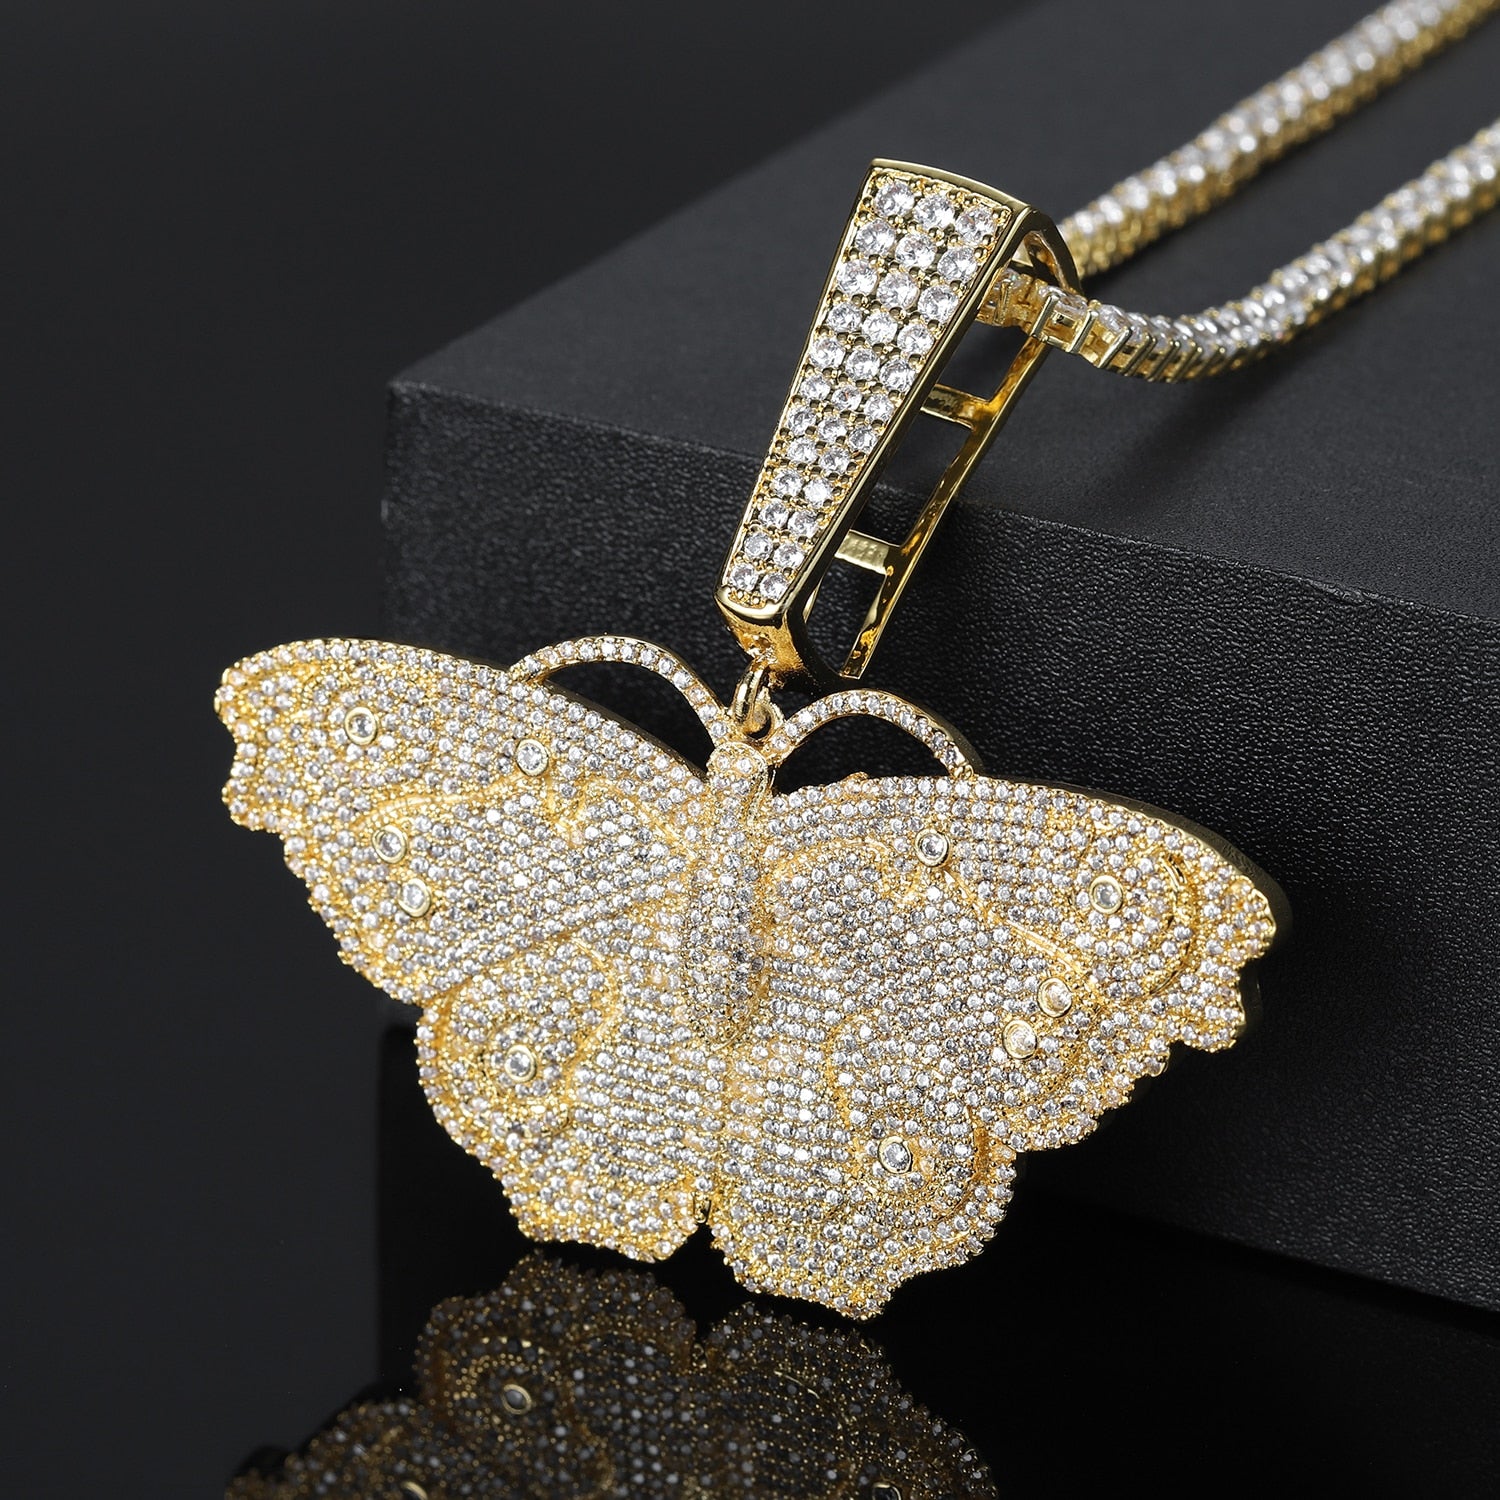 Blinged Butterfly Pendant Necklace